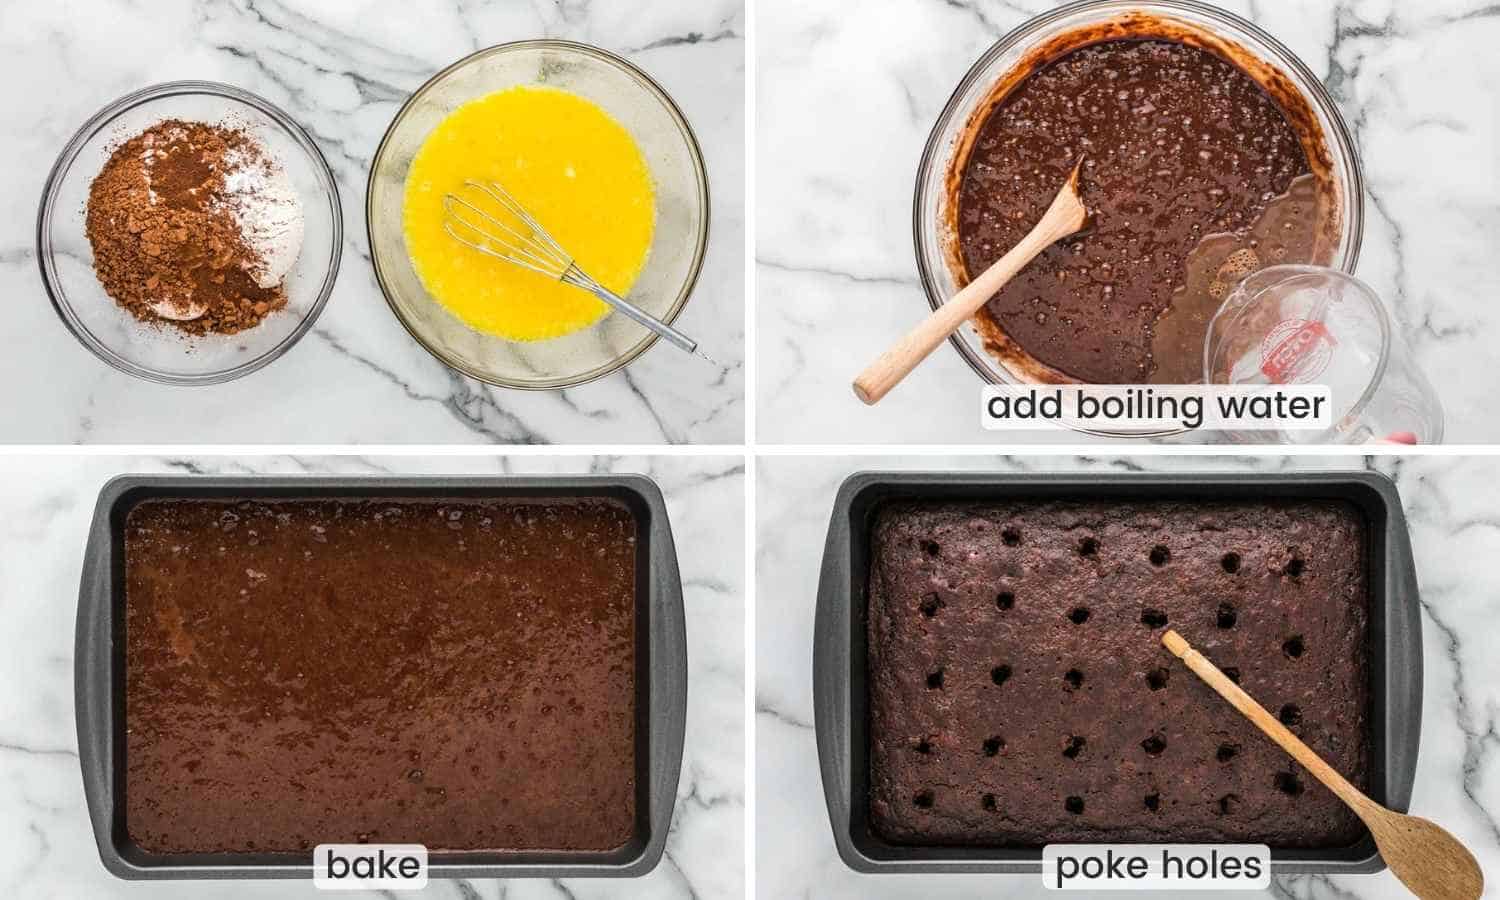 Collage of four images showing how to make chocolate cake batter, bake the cake and then poke holes.